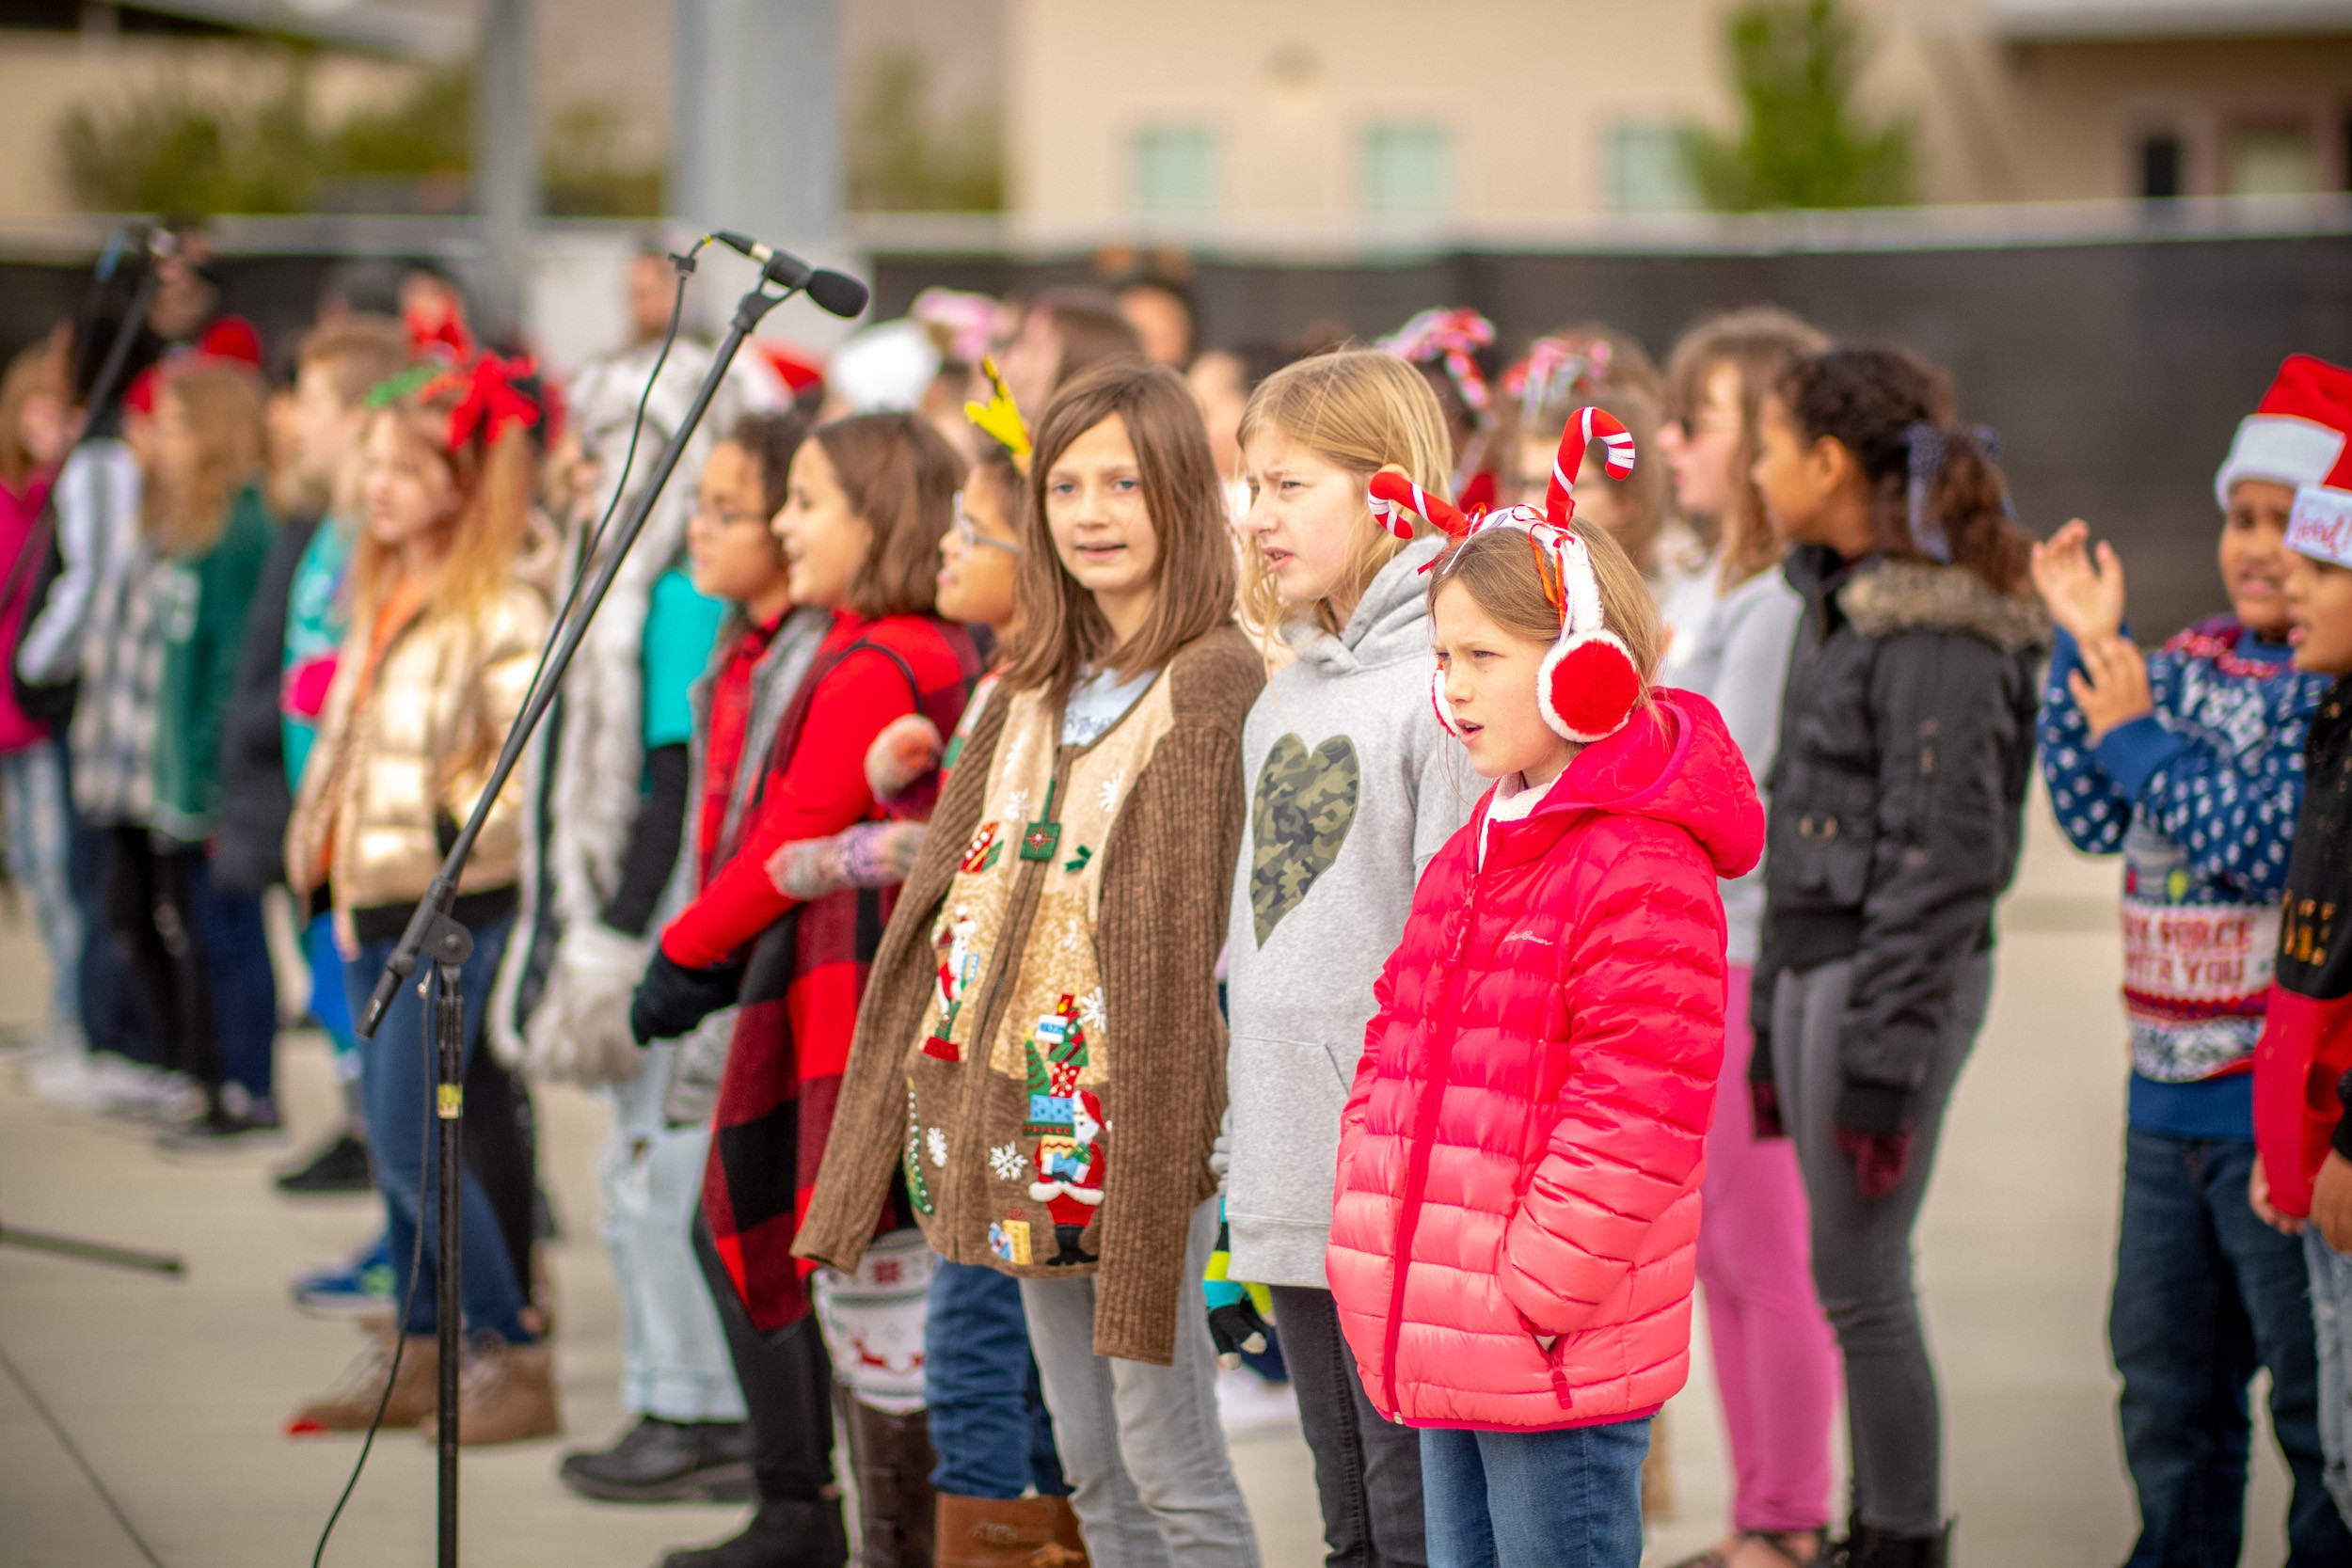 Photo of children wearing coats and Christmas attire singing at a Hutto community event.